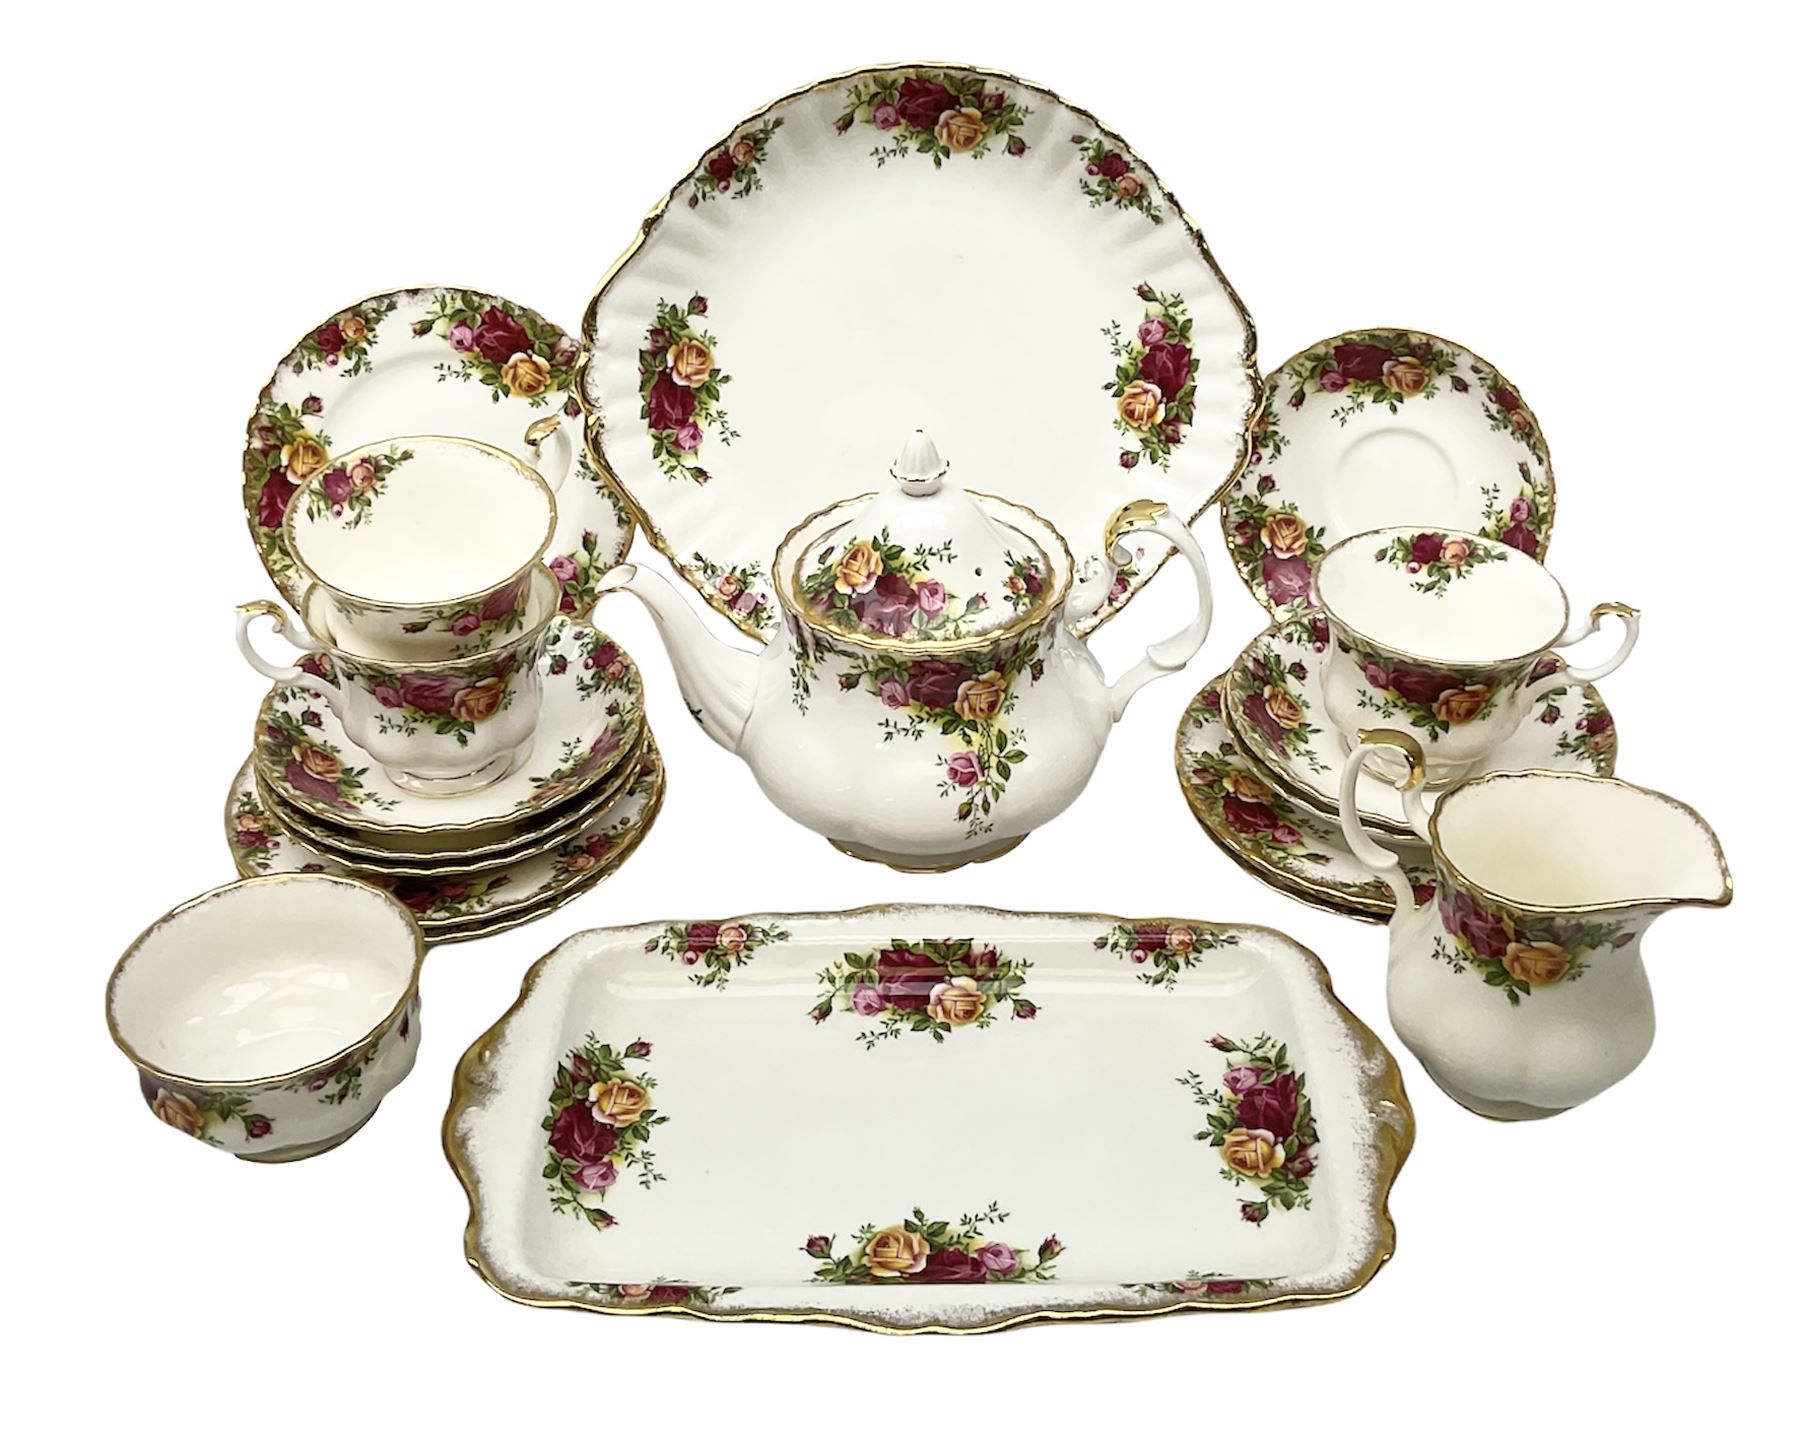 Royal Albert Old Country Roses pattern tea service